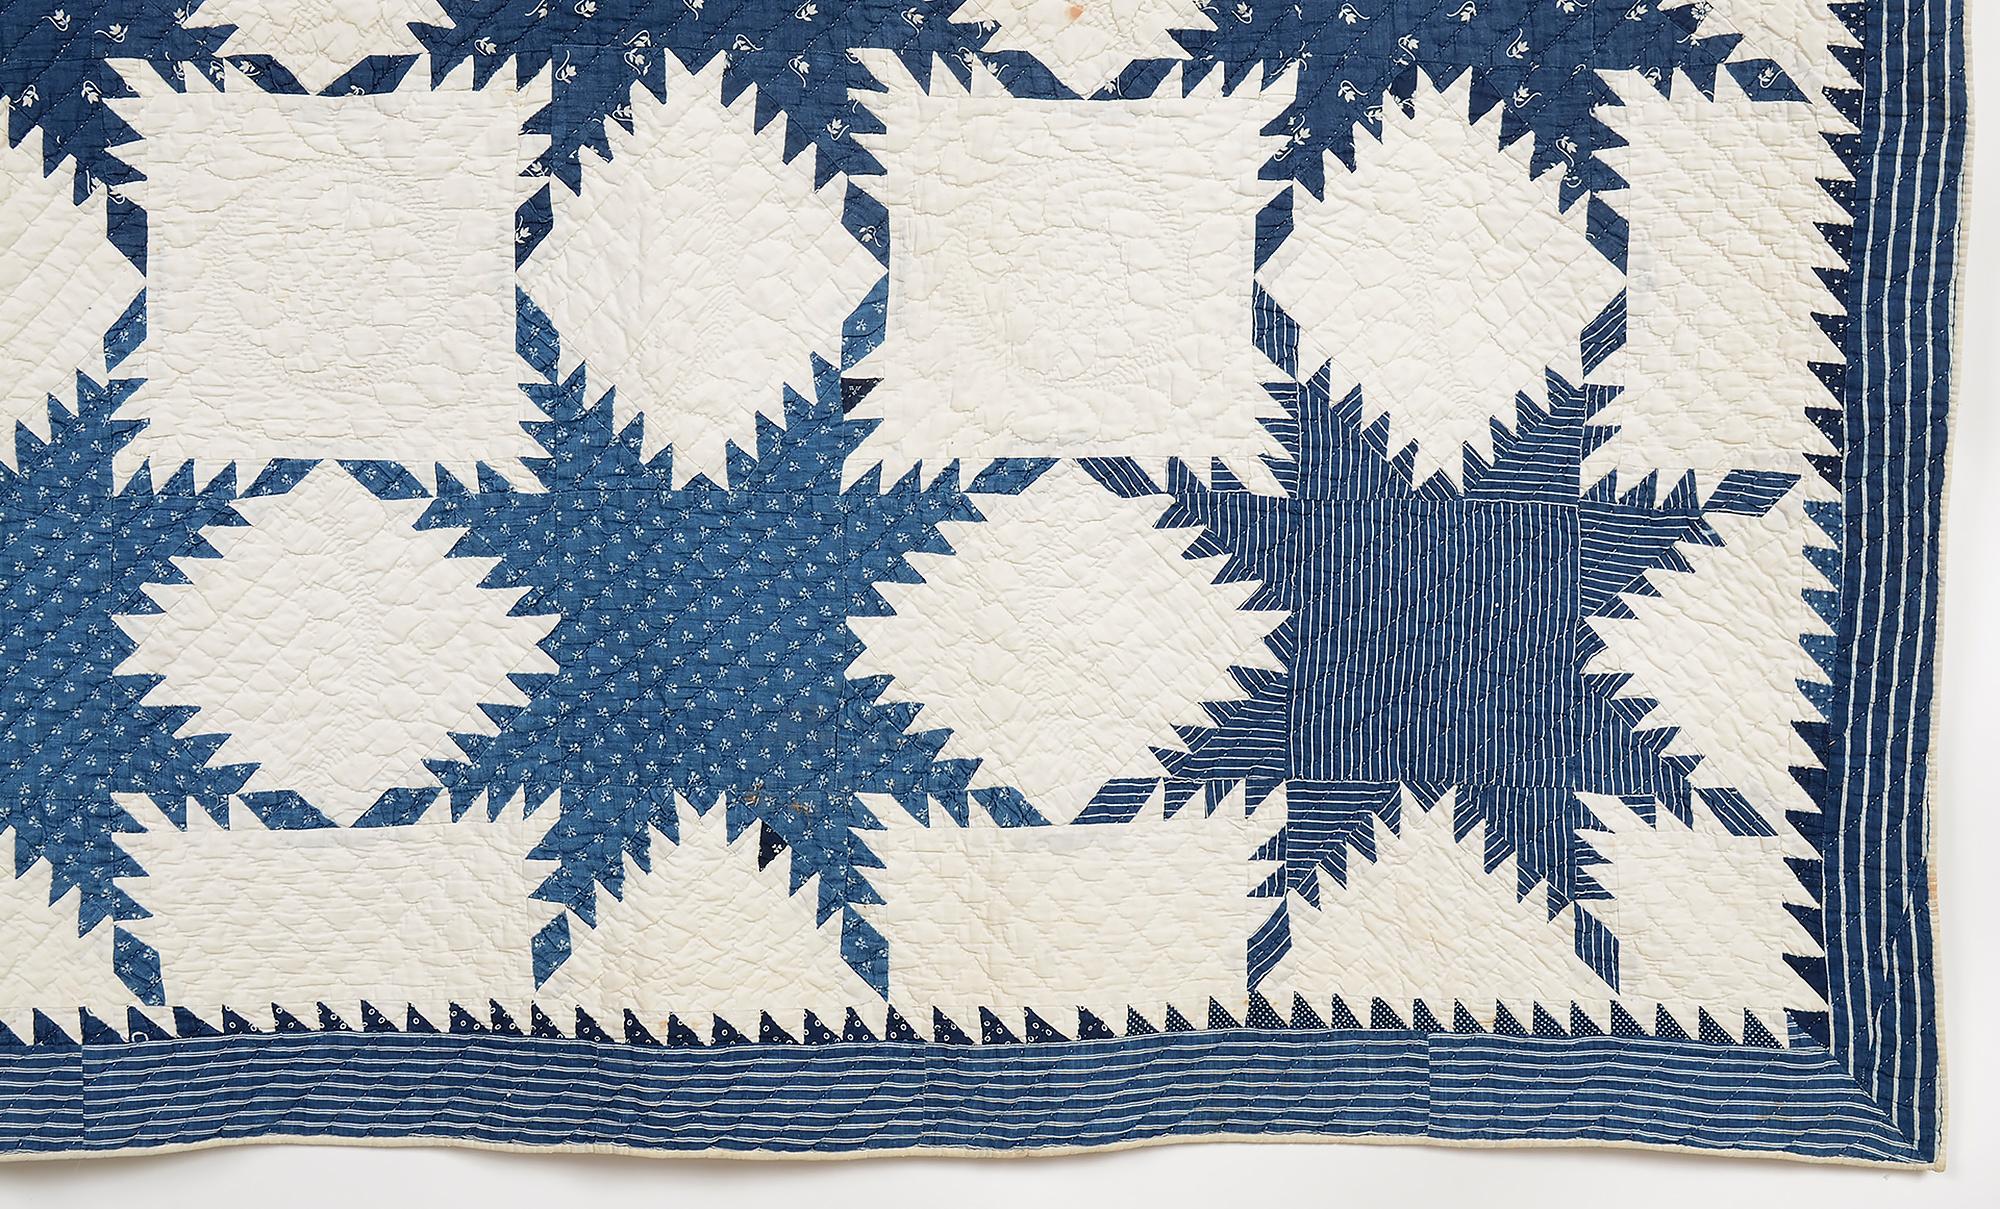 American Indigo Feathered Stars Quilt For Sale